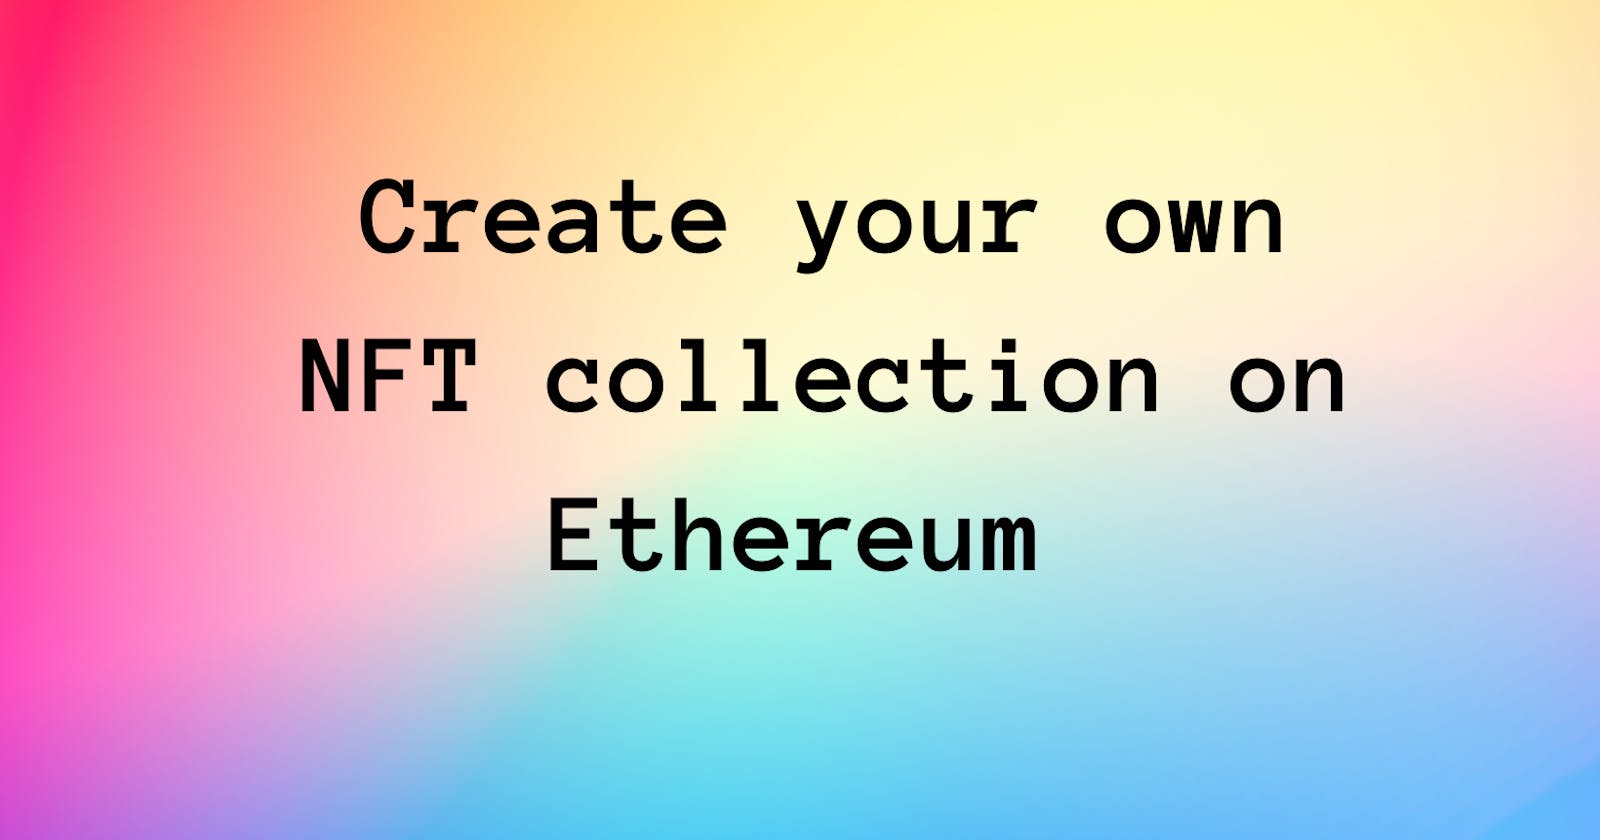 Create your own NFT collection on Ethereum w/Solidity